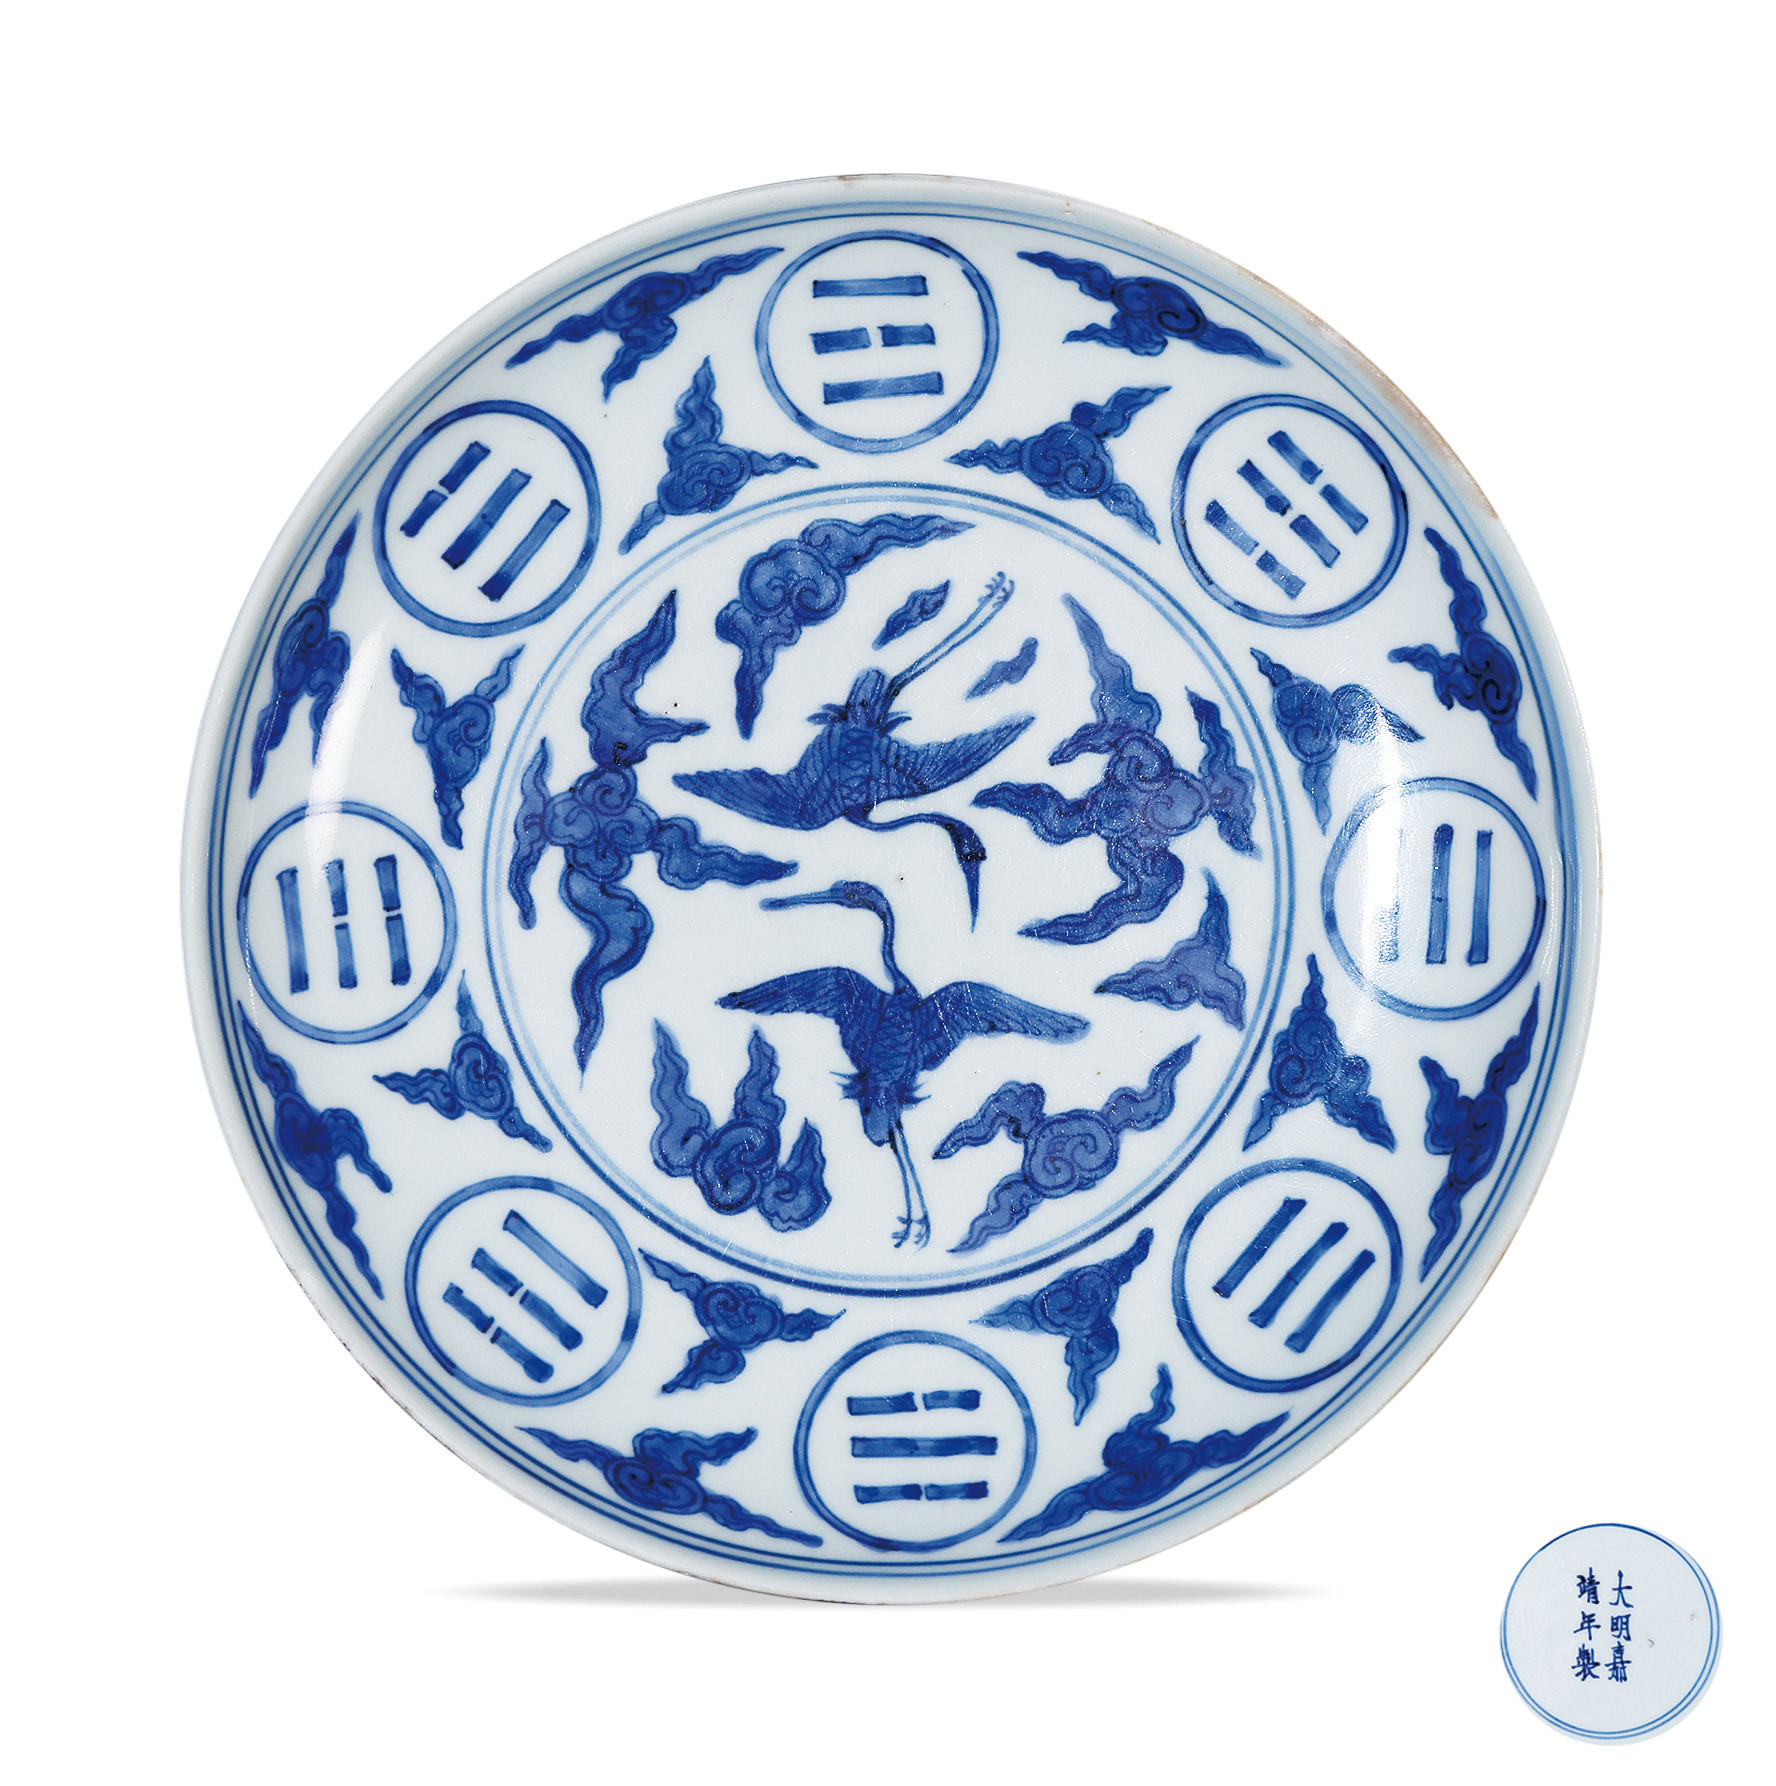 A BLUE AND WHITE PLATE WITH DRAGON DESIGN